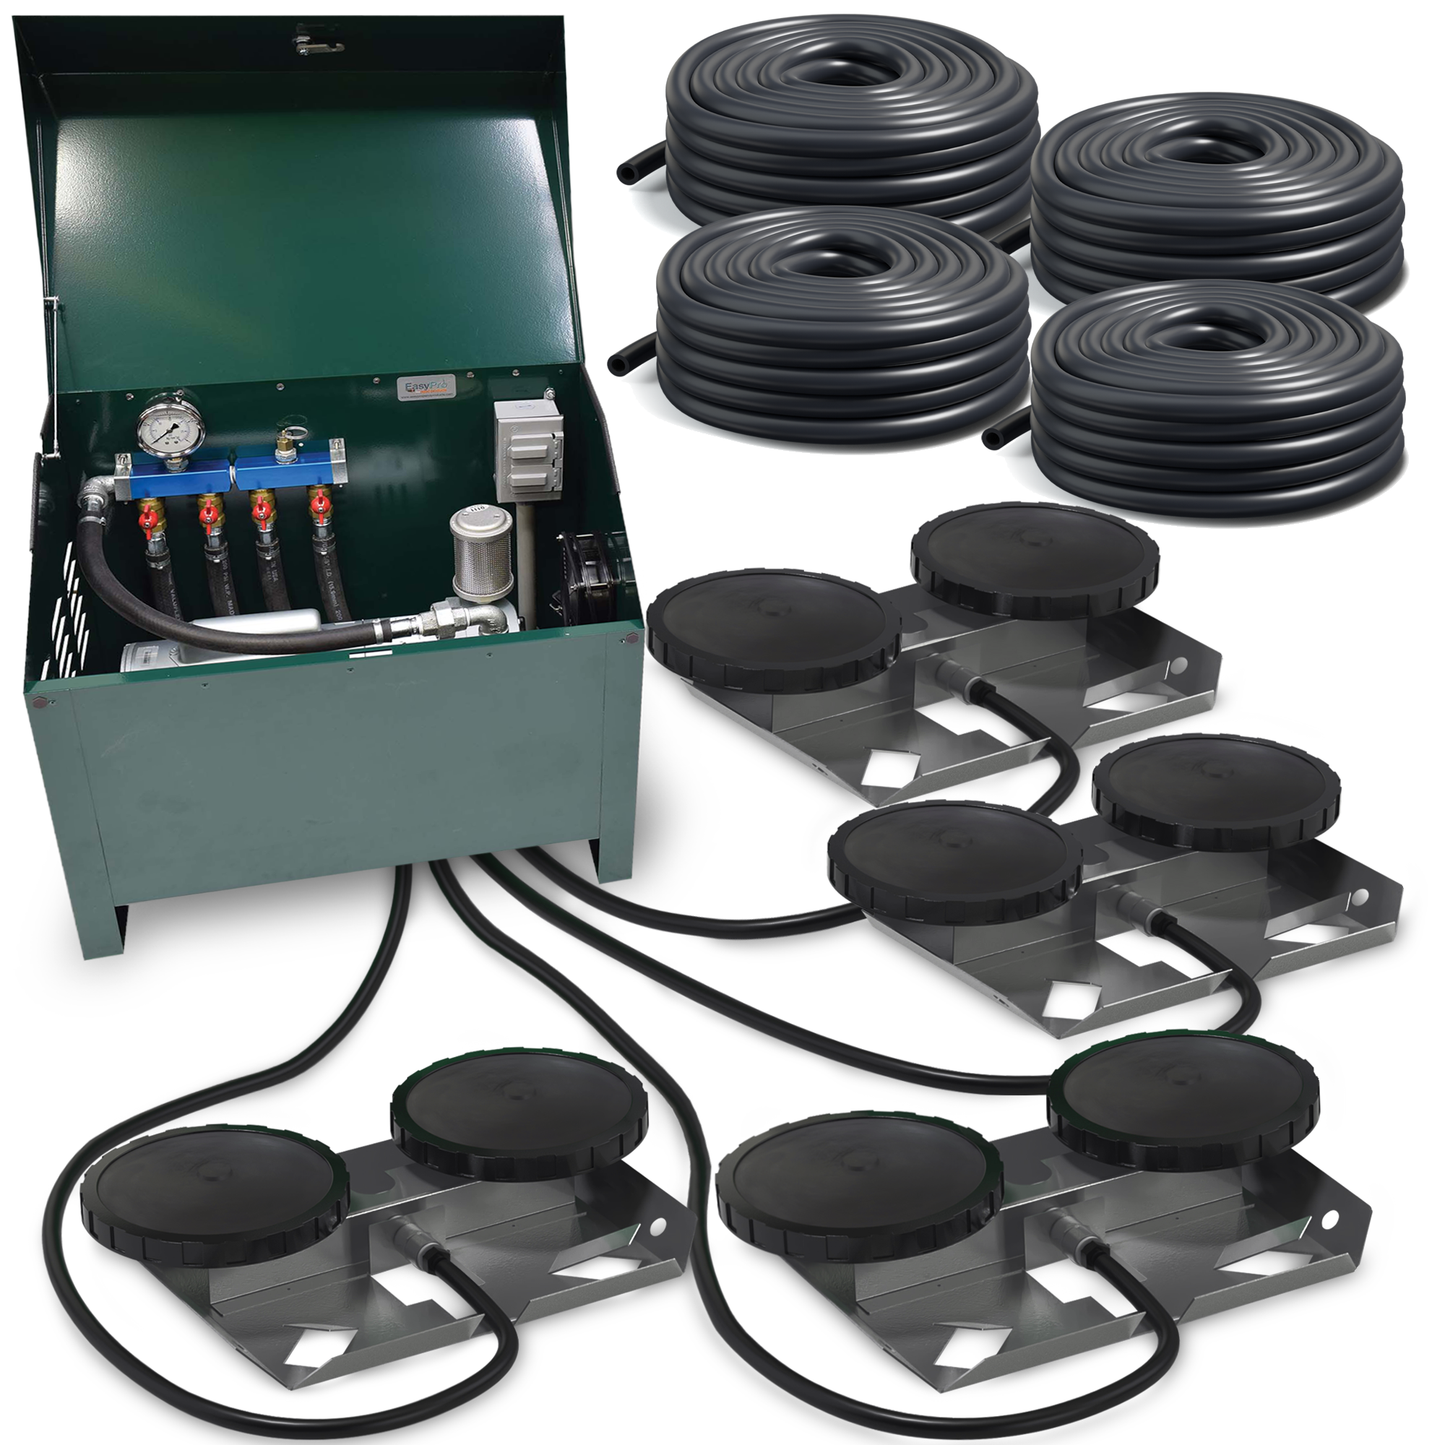 AirPro 3/4 HP Rotary Vane Pond Aerator Kit - up to 6 Acre Ponds - Living Water Aeration